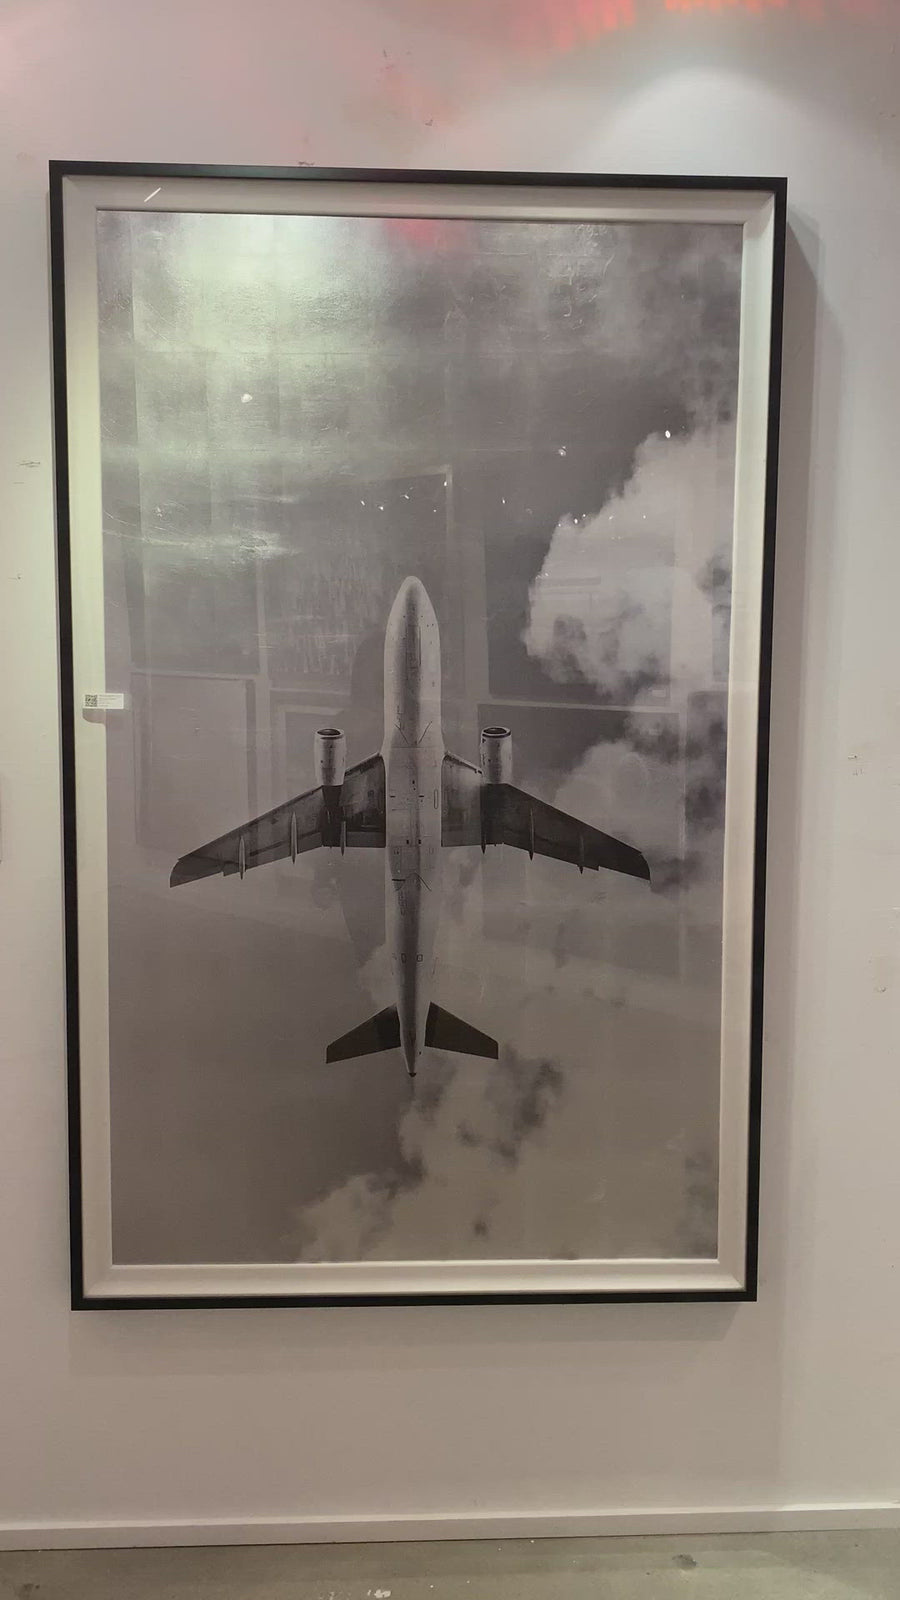 This Shimmering Airplane has us craving for travel. Hang in your office, bedroom, or area to elevate the space.   Size: 44" x 72" Medium: Silver Leafed Paper Specialty: Giclee on Hand Applied Silver Leaf  Each piece is made just for you! Please allow 6-8 weeks for production and delivery.